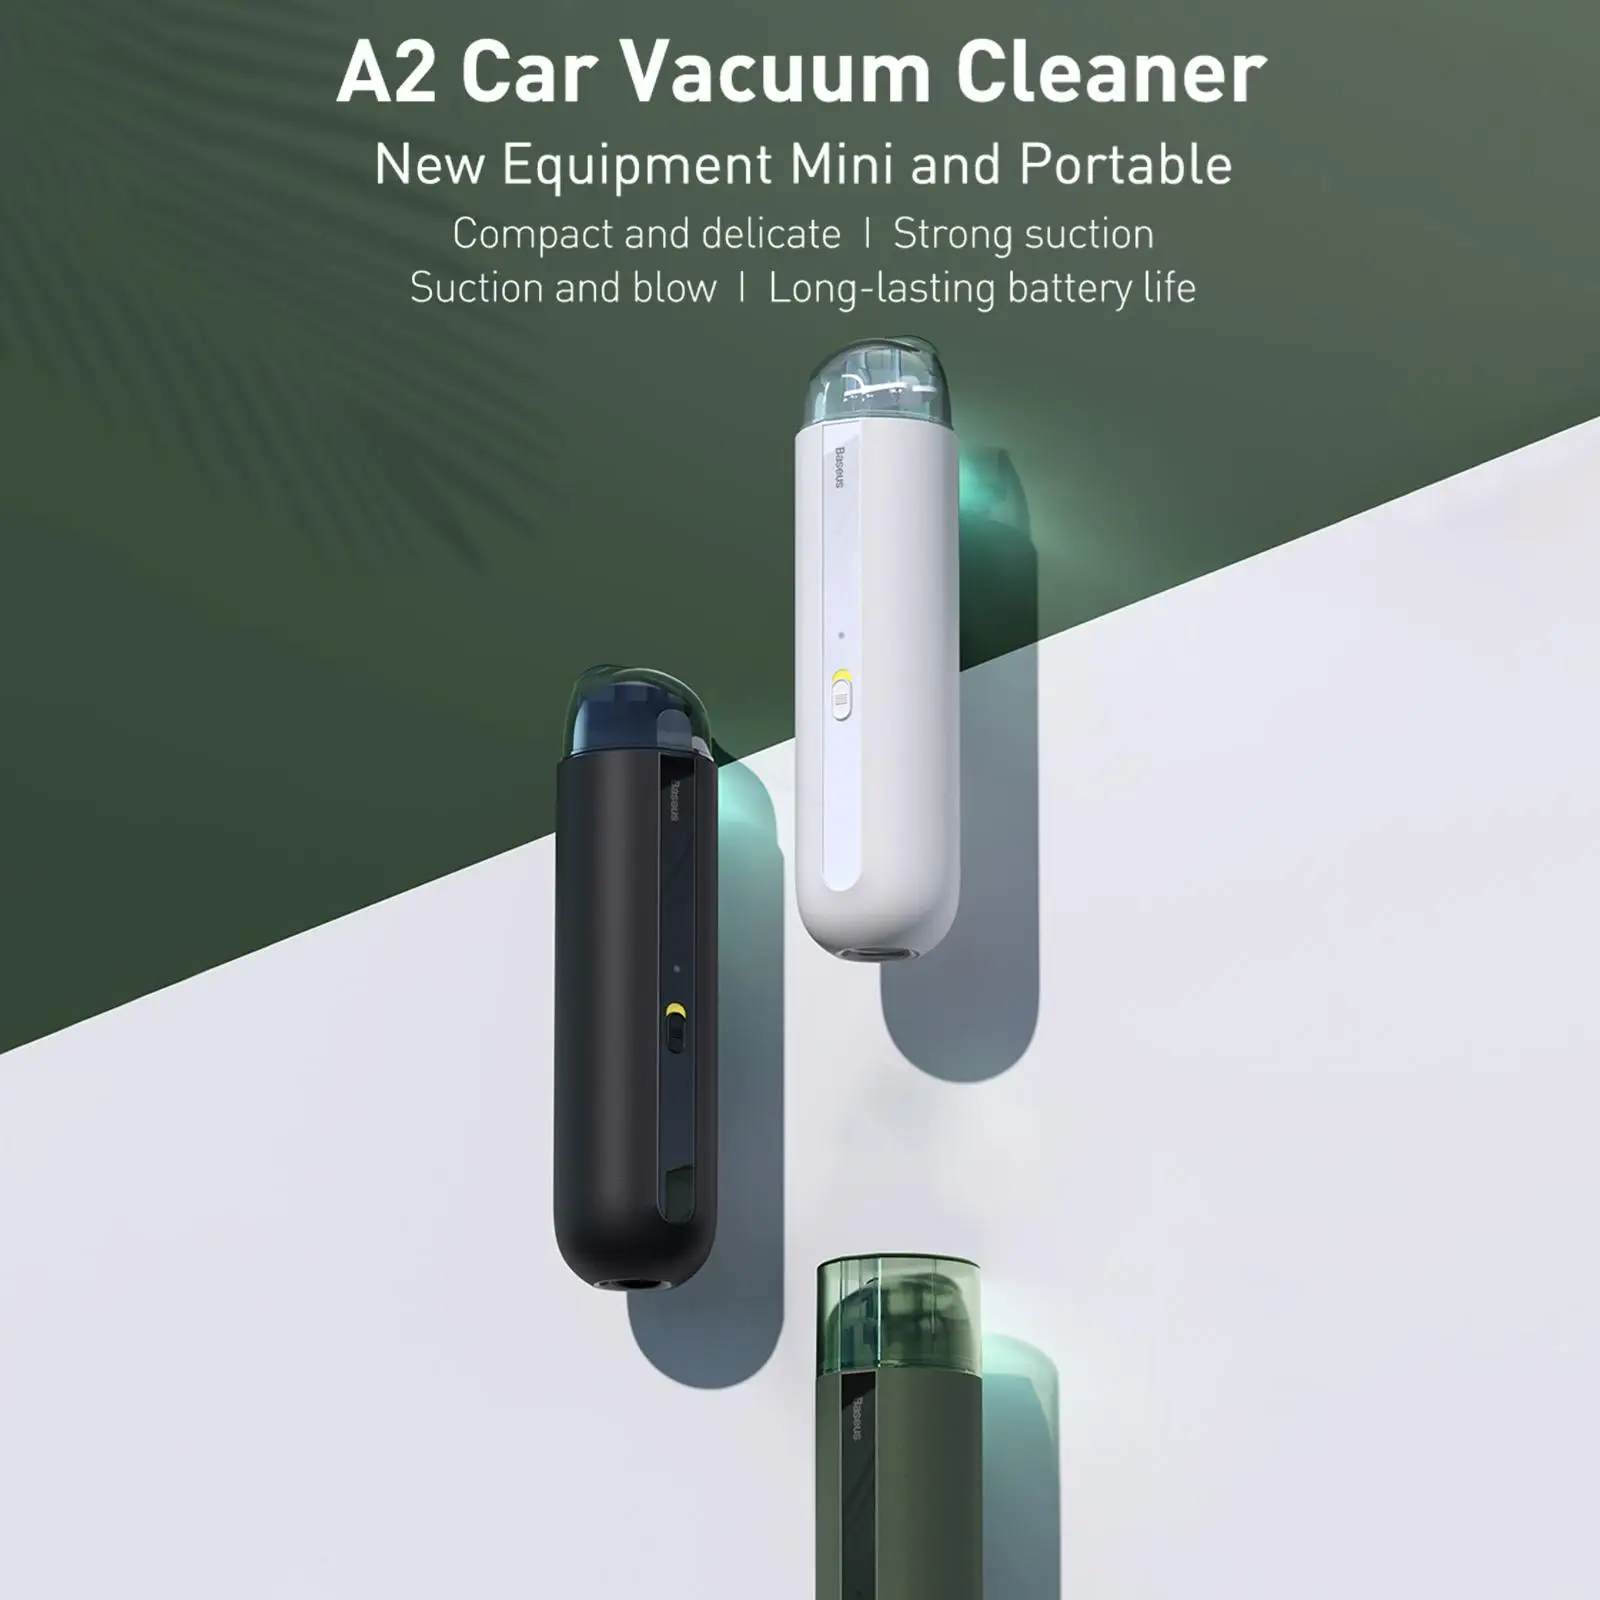 Cordless Handheld Vacuum Cleaner Cleaning Car Interior for Office